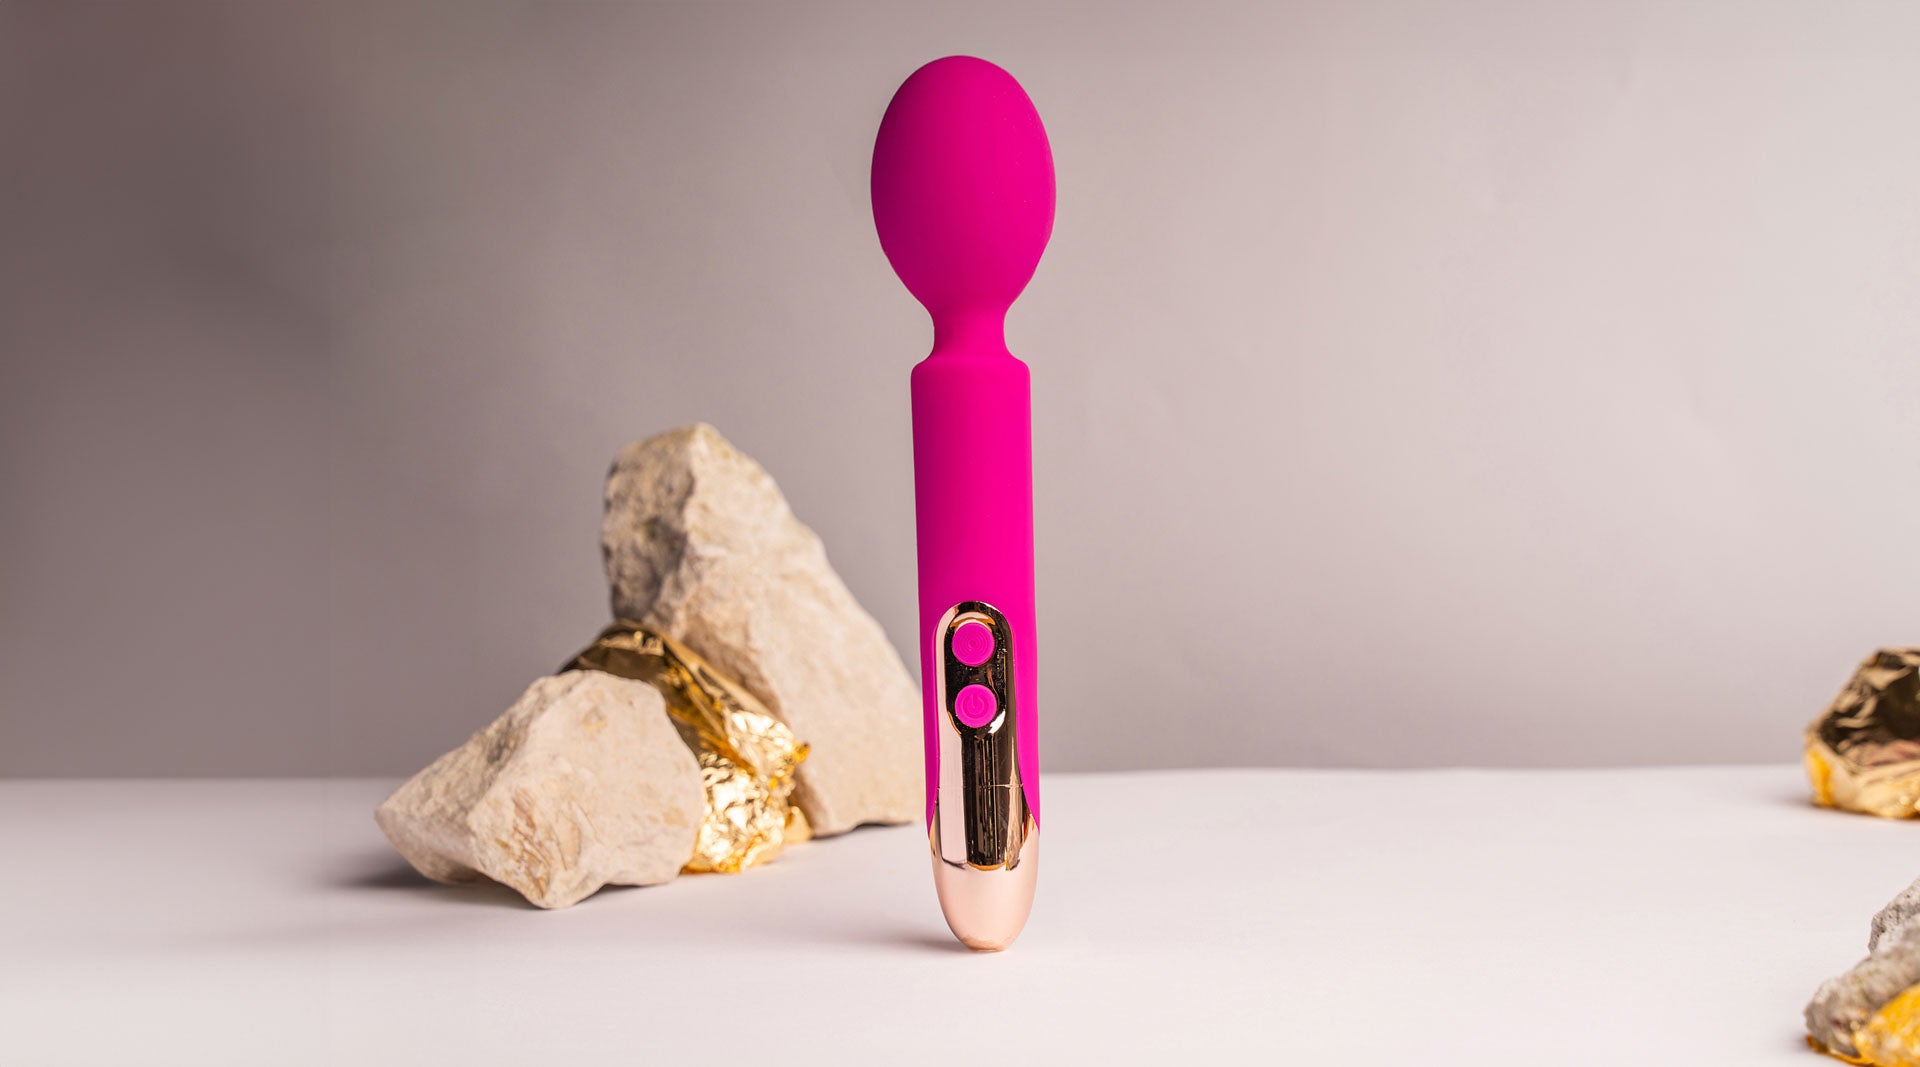 Silicone wand vibrator in pink.